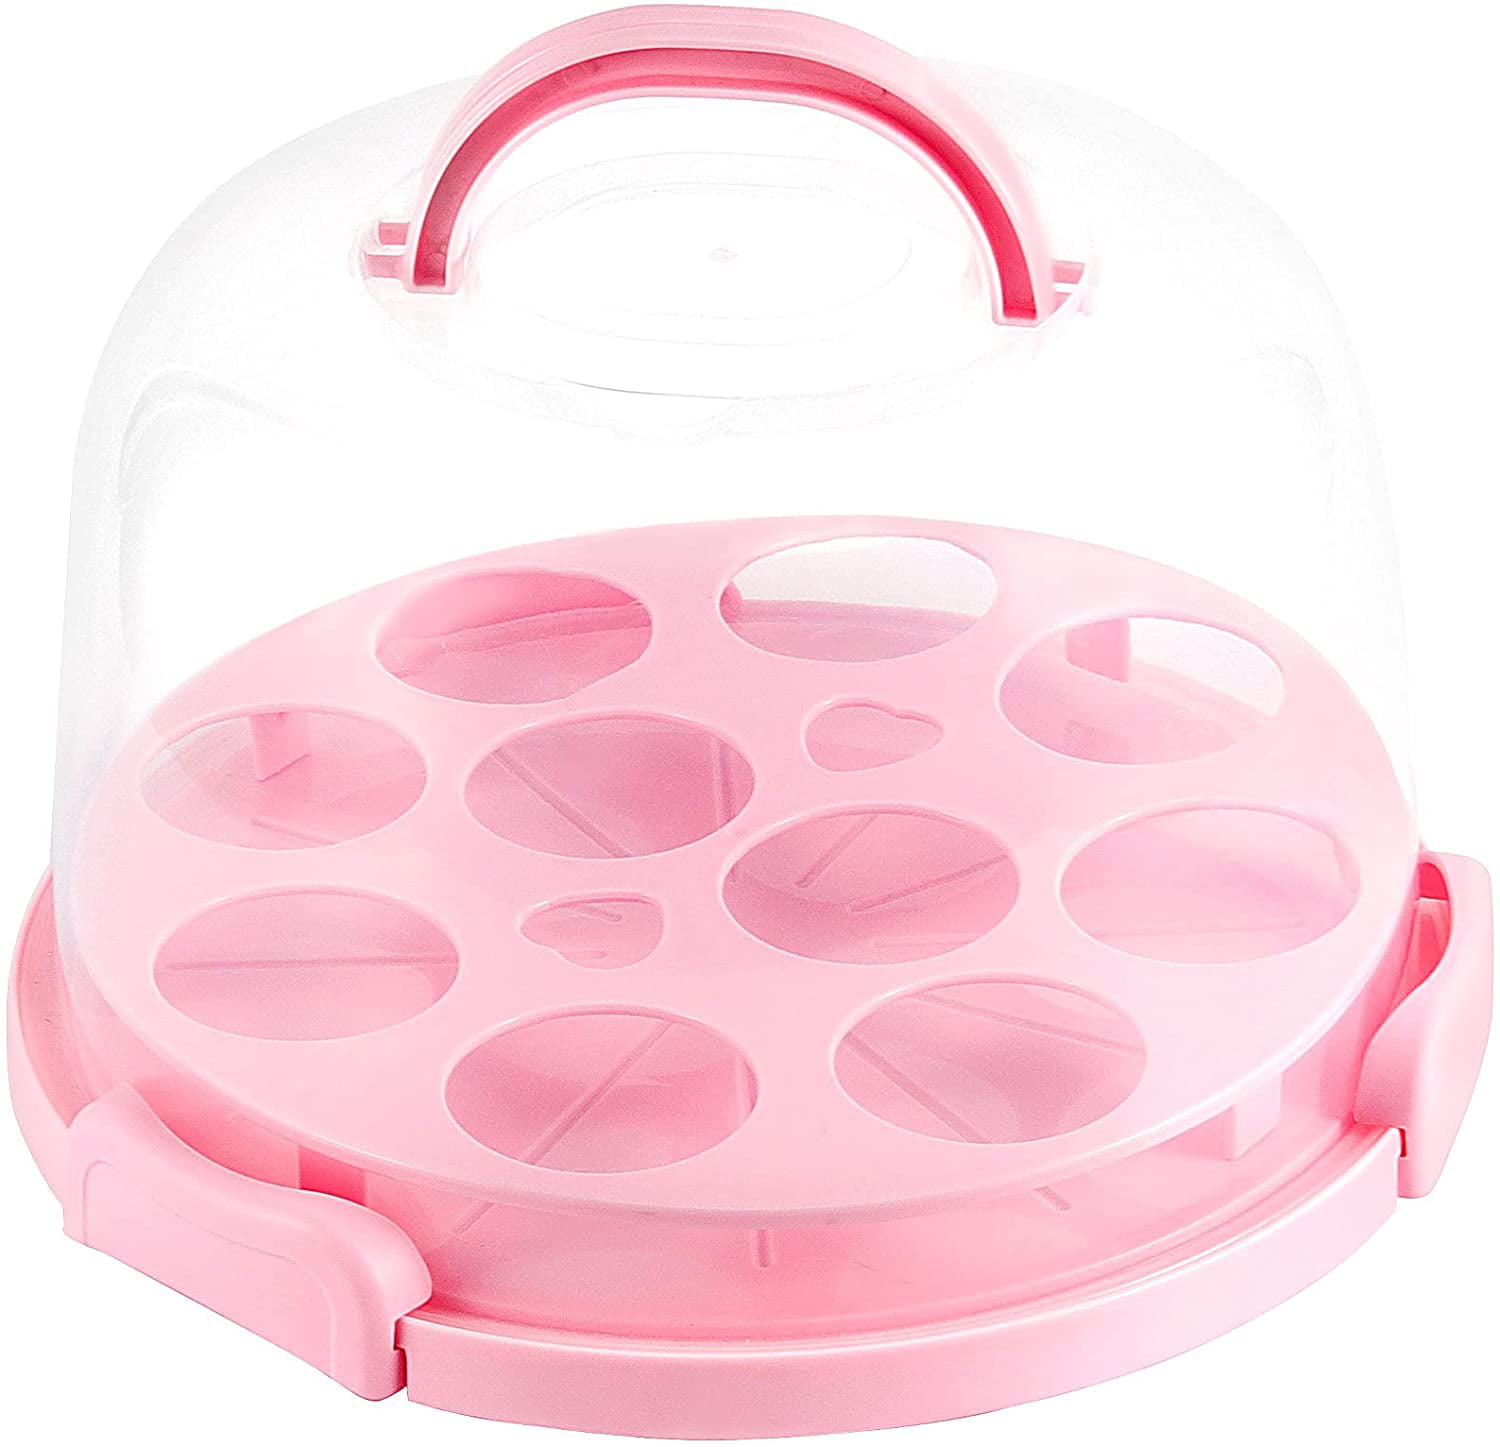 BPA free Pink 11 Cupcake Muffins Cake Carrier Holder with Collapsible Handles 